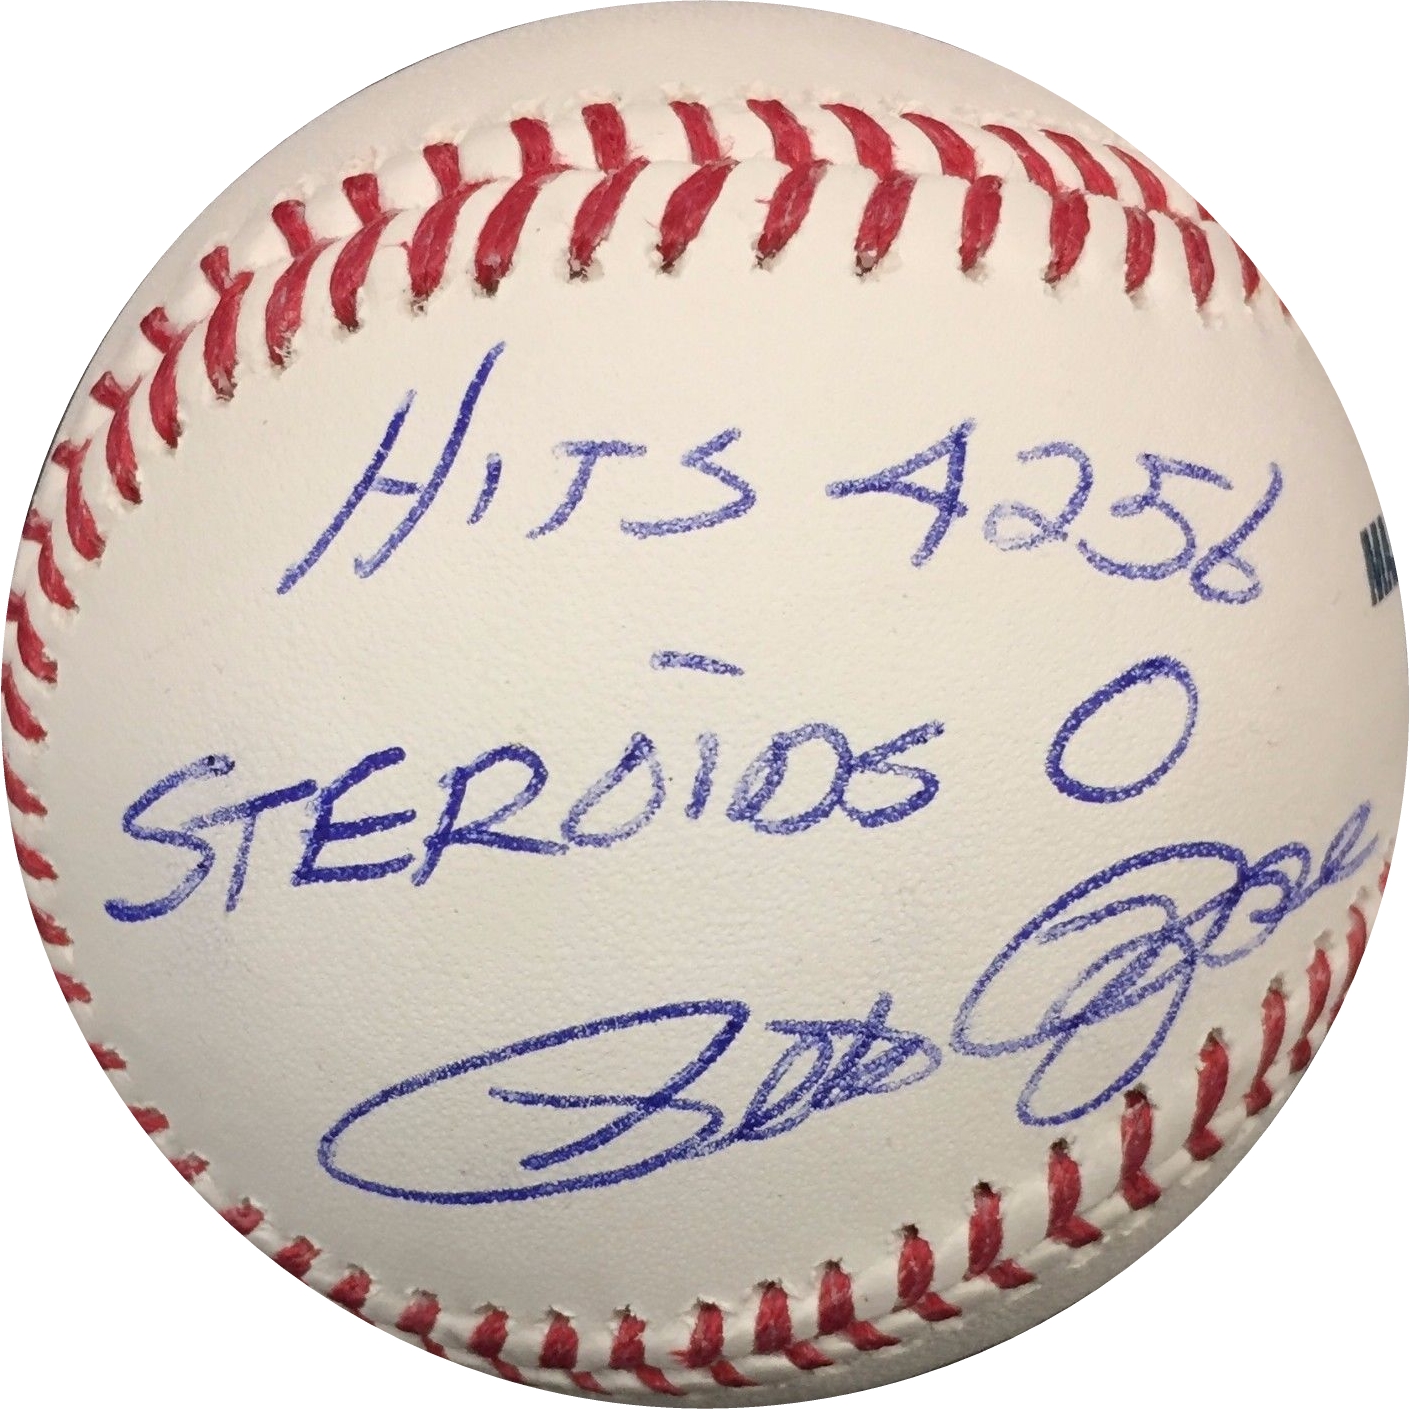 Pete Rose Hits 8 Steroids 8 Autographed Baseball OMLB Pete Rose  Authentication